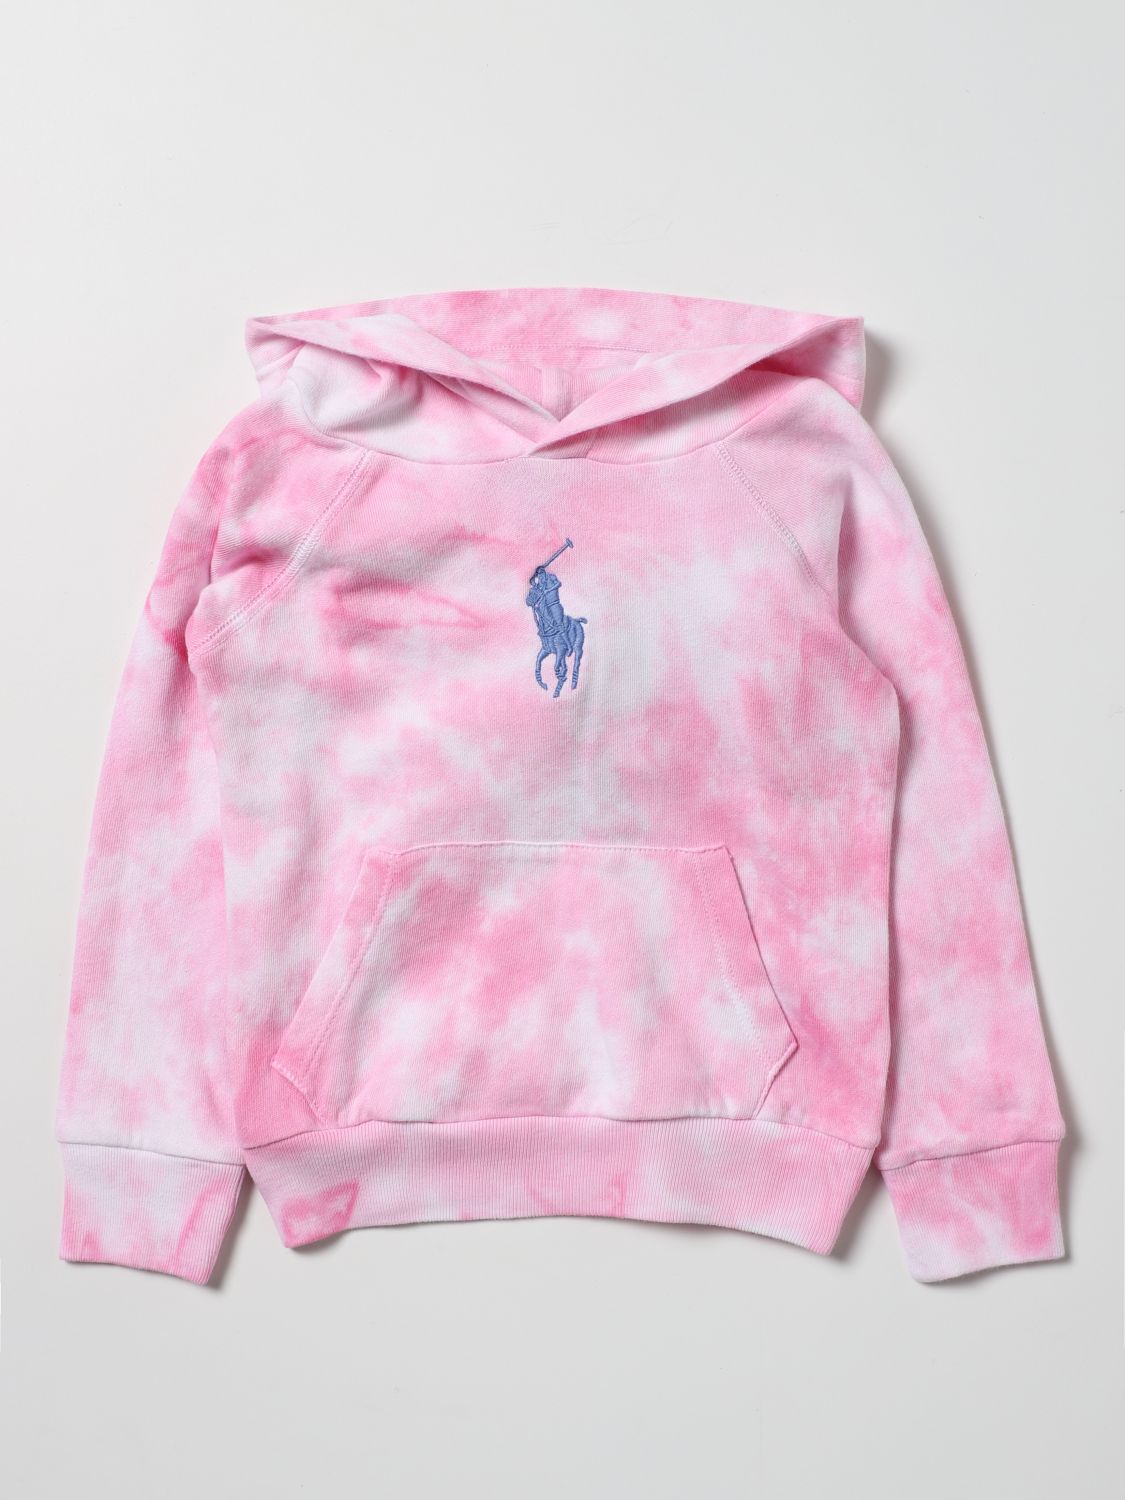 POLO RALPH LAUREN: sweater for girls - Pink | Polo Ralph Lauren sweater  312856407 online on 